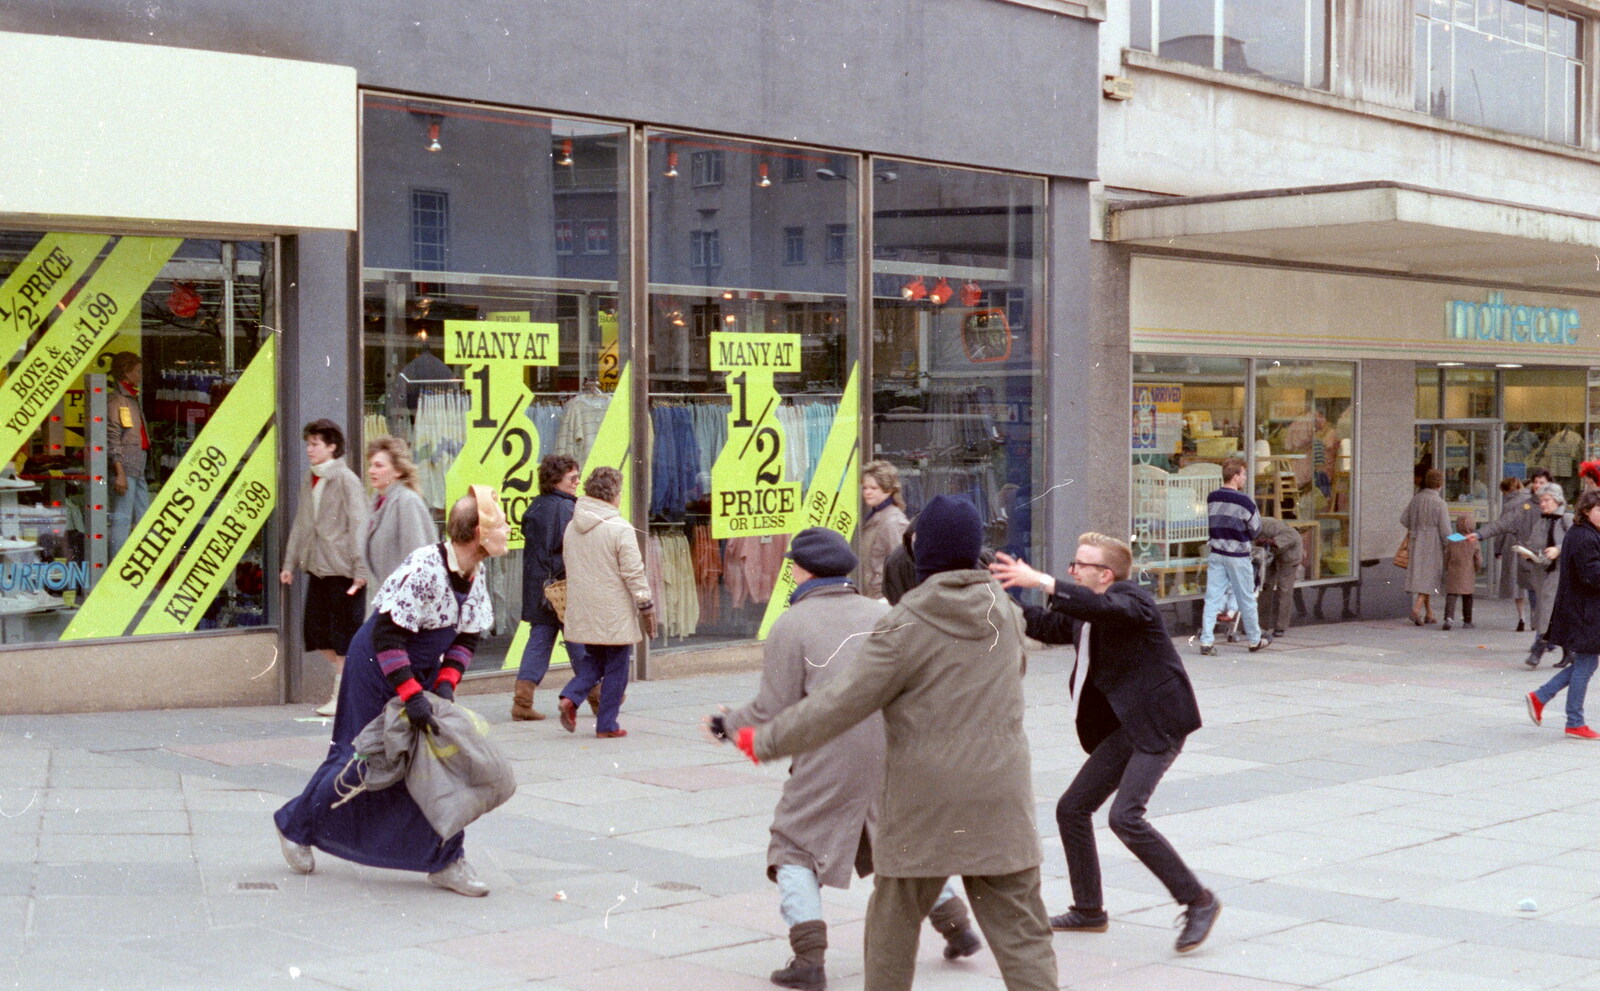 More political re-enactments from Uni: A Van Gogh Grant Cuts Protest, Plymouth, Devon - 1st March 1986